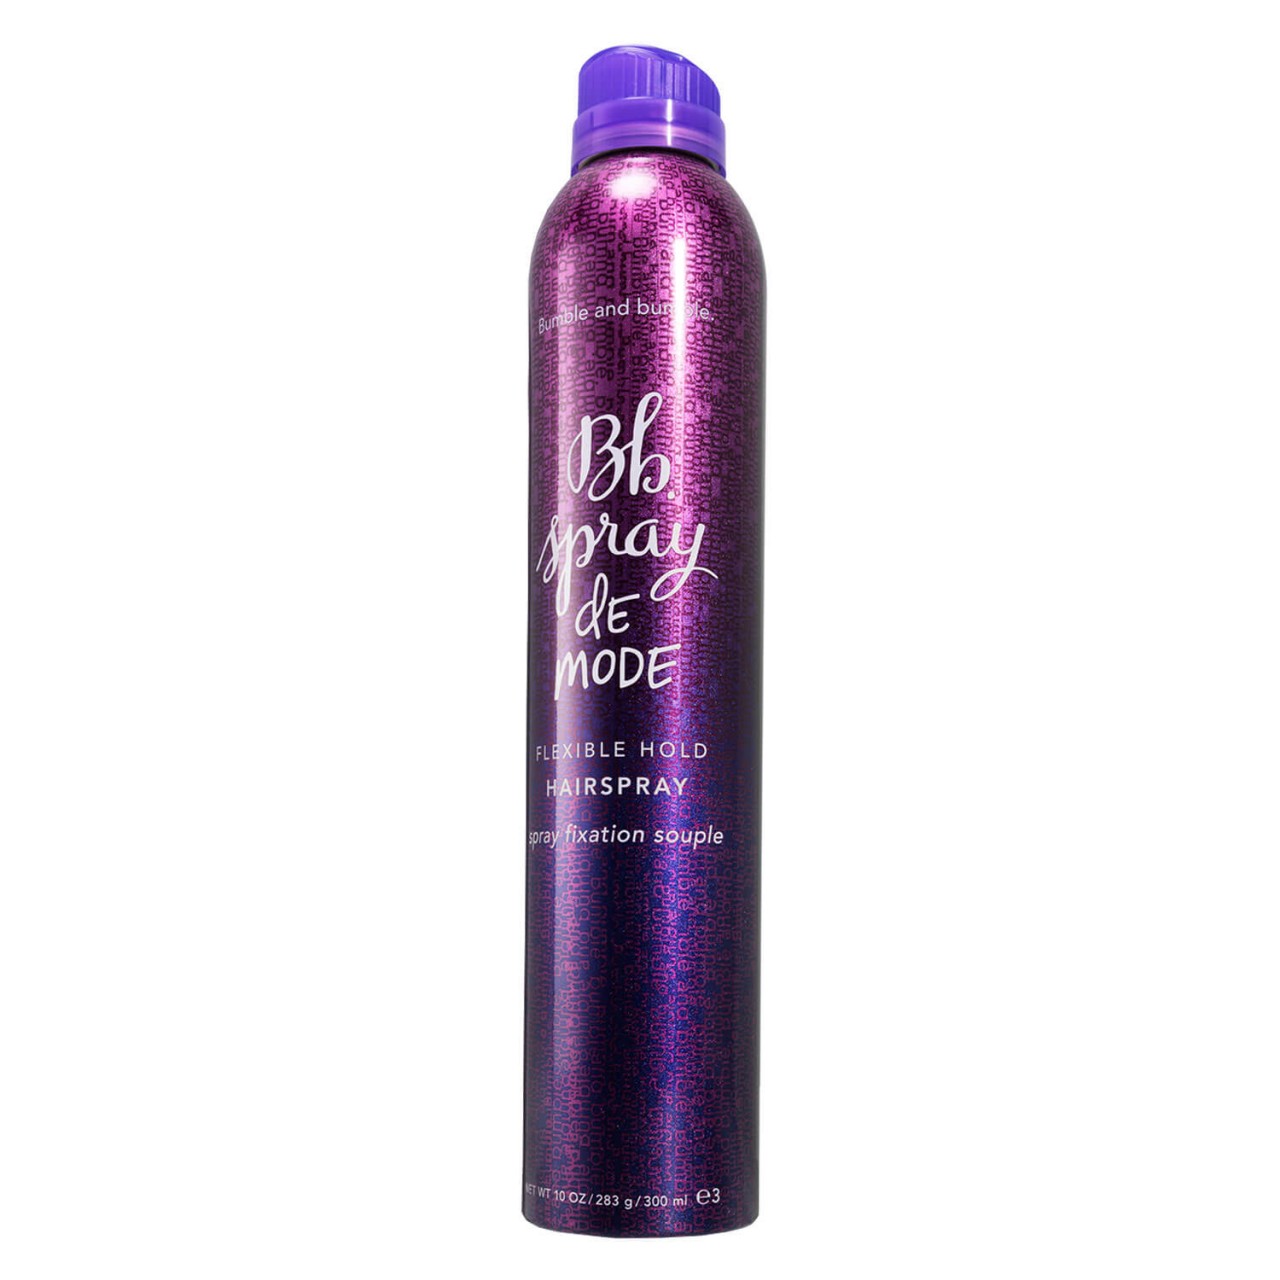 Bb. Styling - Spray de Mode Hairspray von Bumble and bumble.